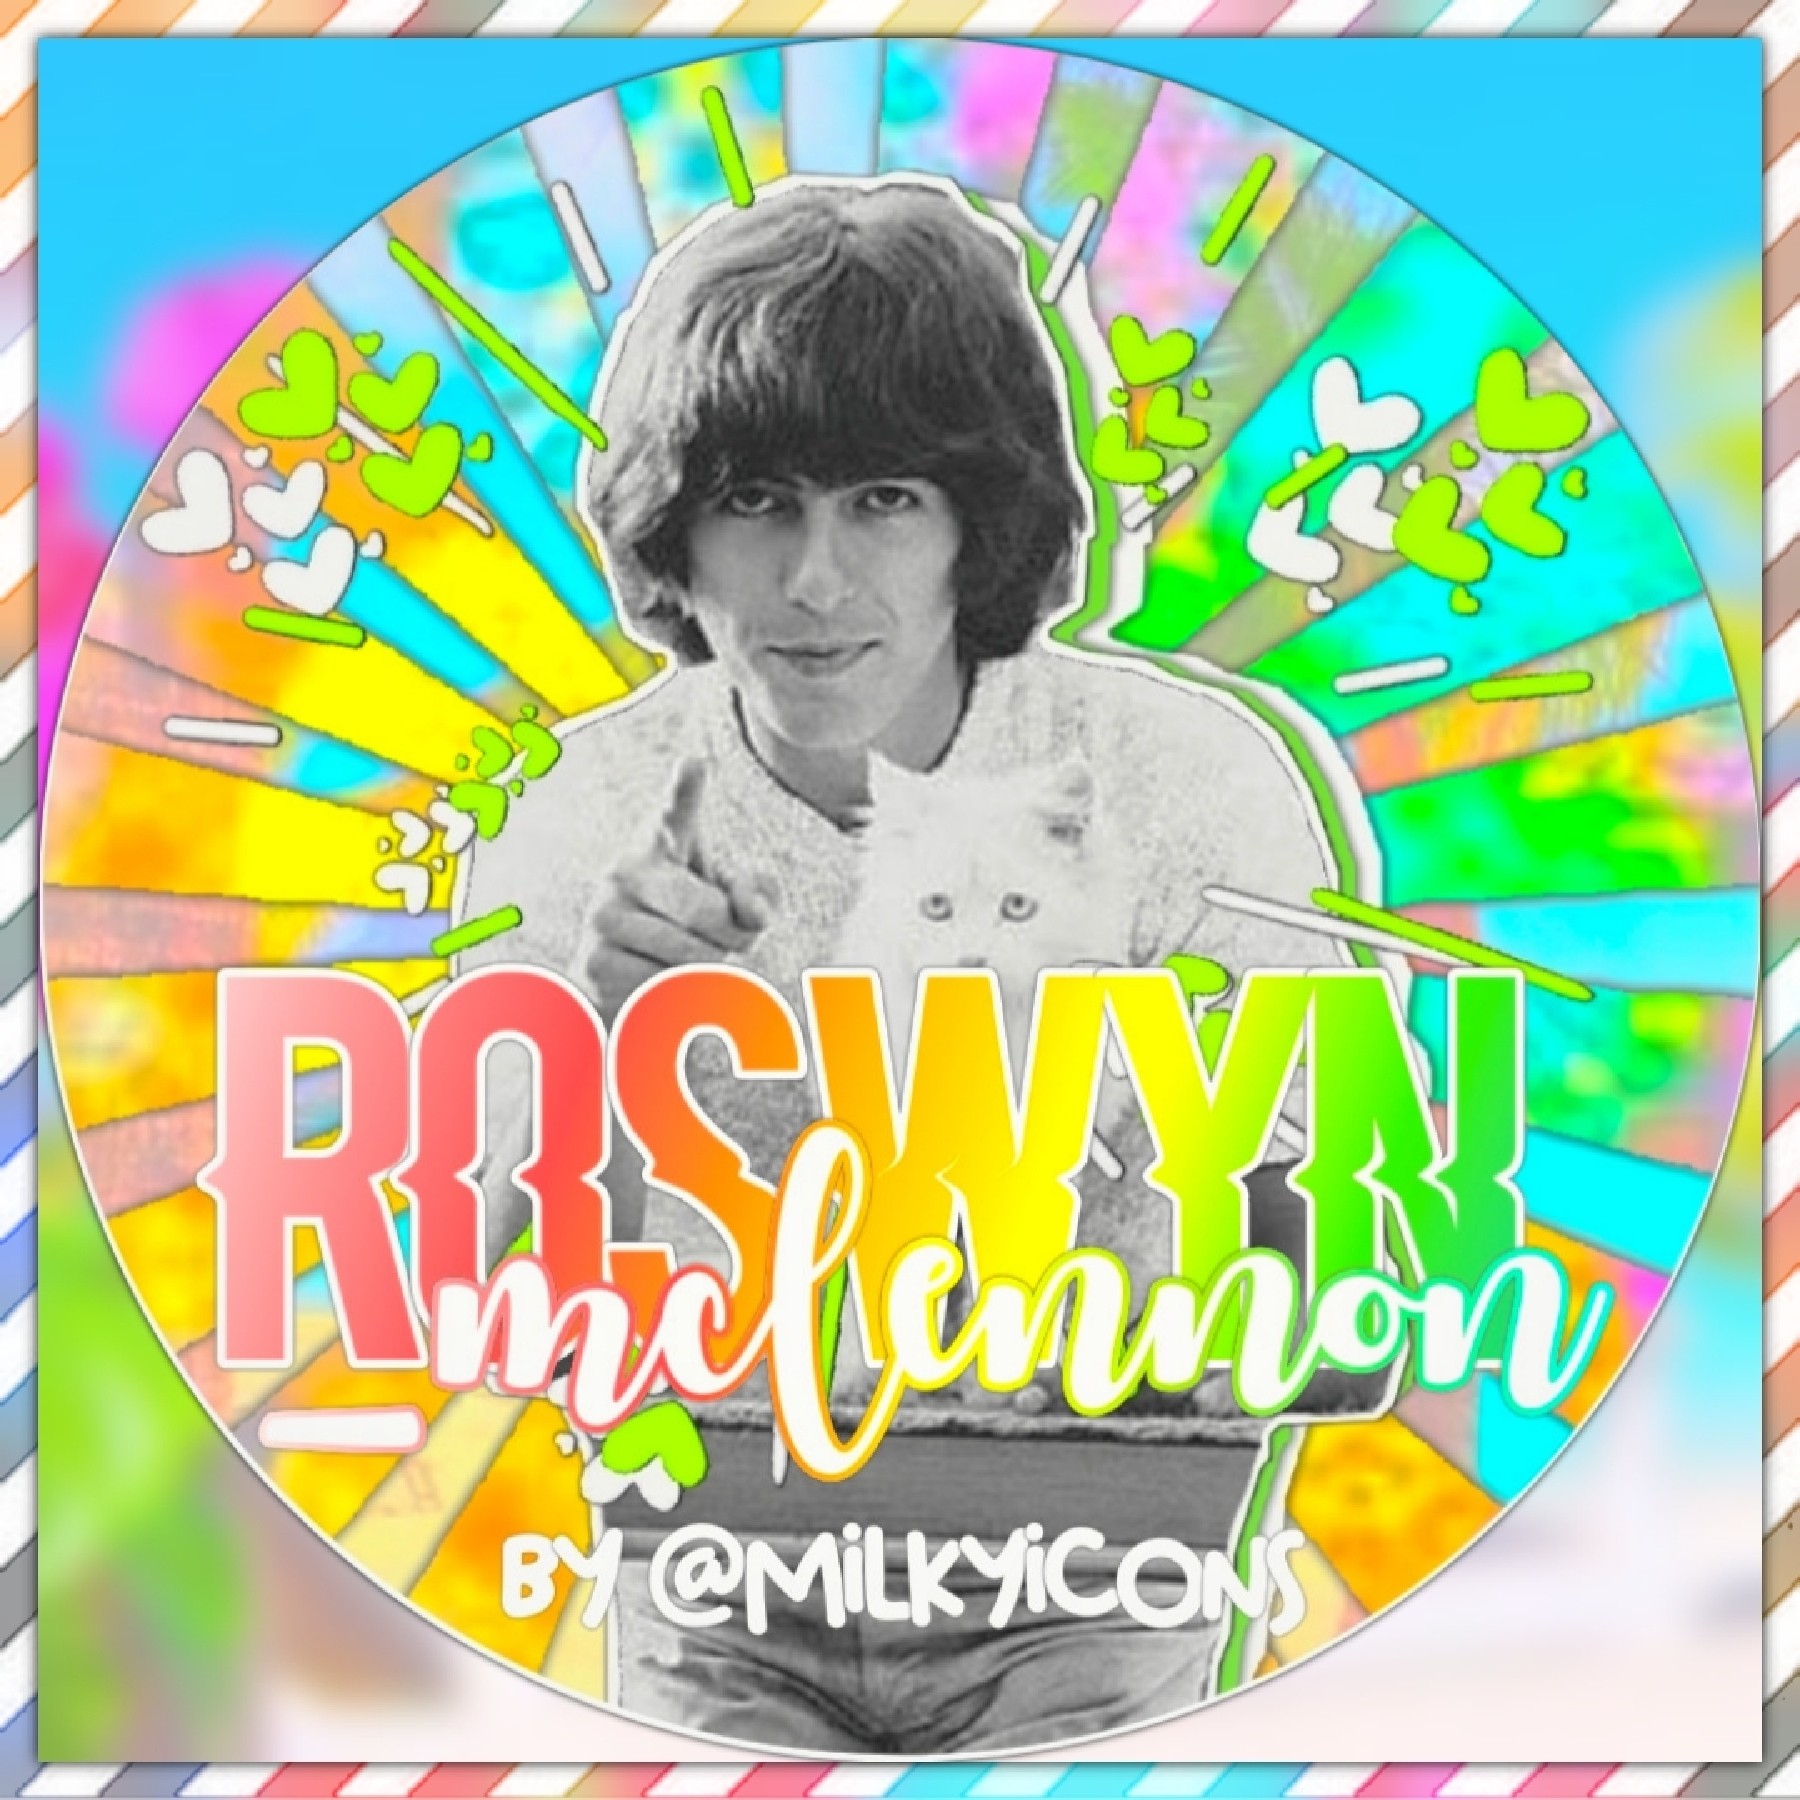 icon for: @Roswyn_Mclennon
style: vibrant
colors: pride colors🌈🏳️‍🌈
hope u like it😚 pls give credits if used!!! 💖